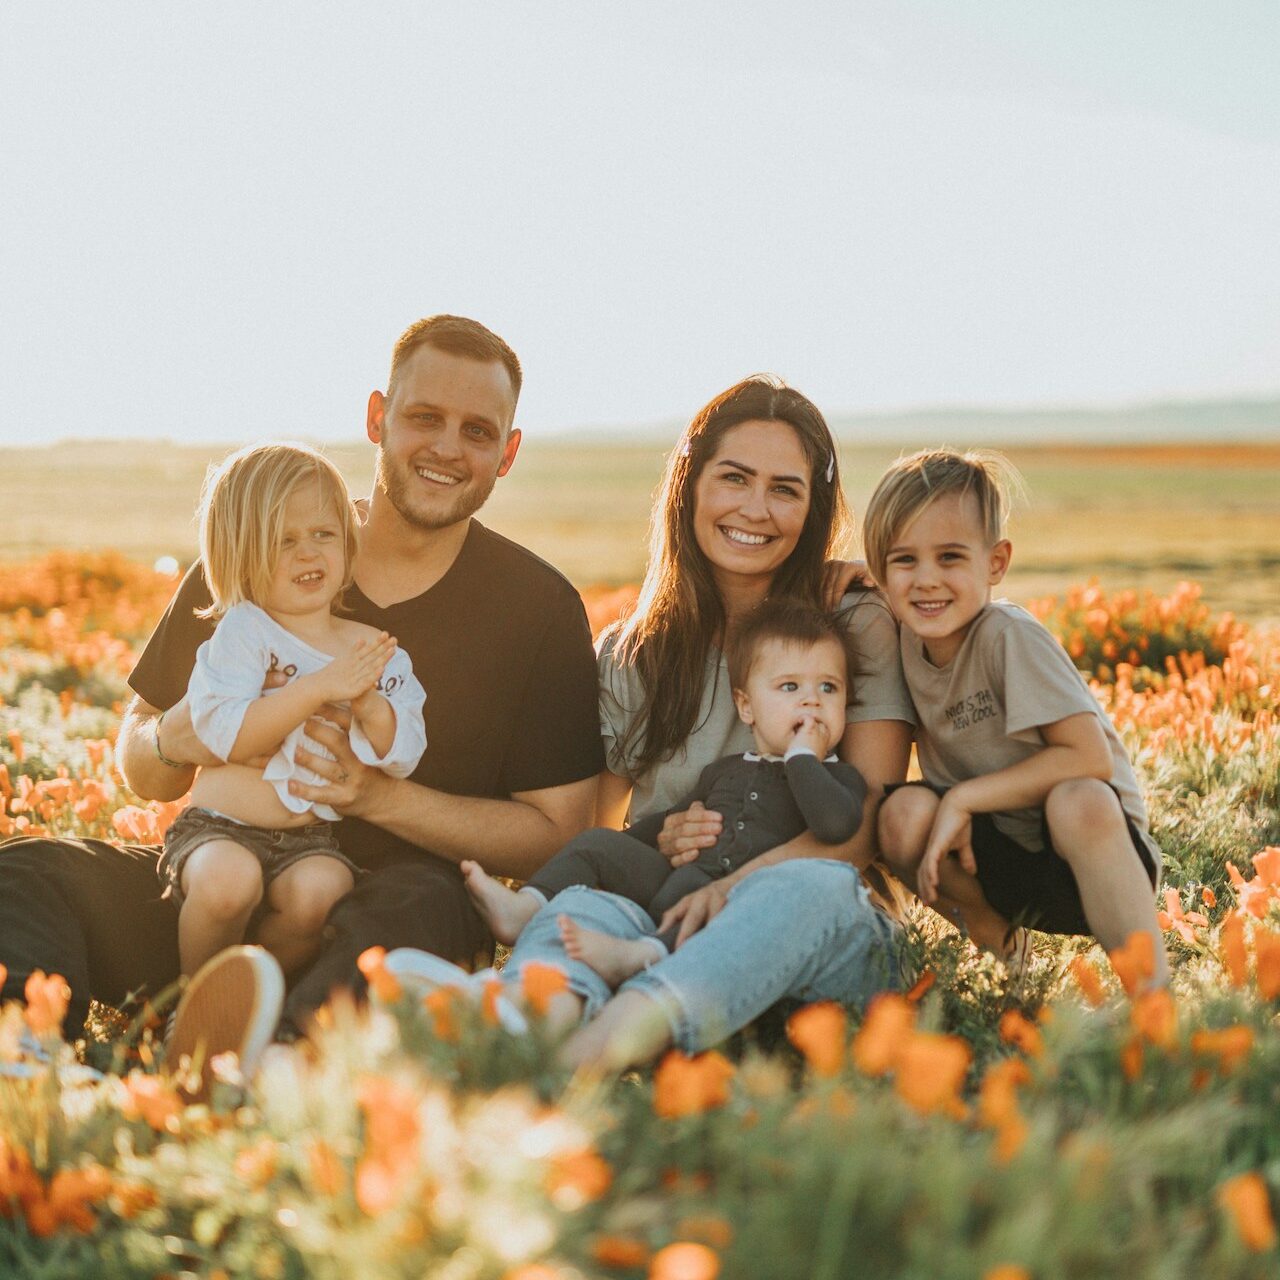 family with 3 young children sat on grass with orange flowers